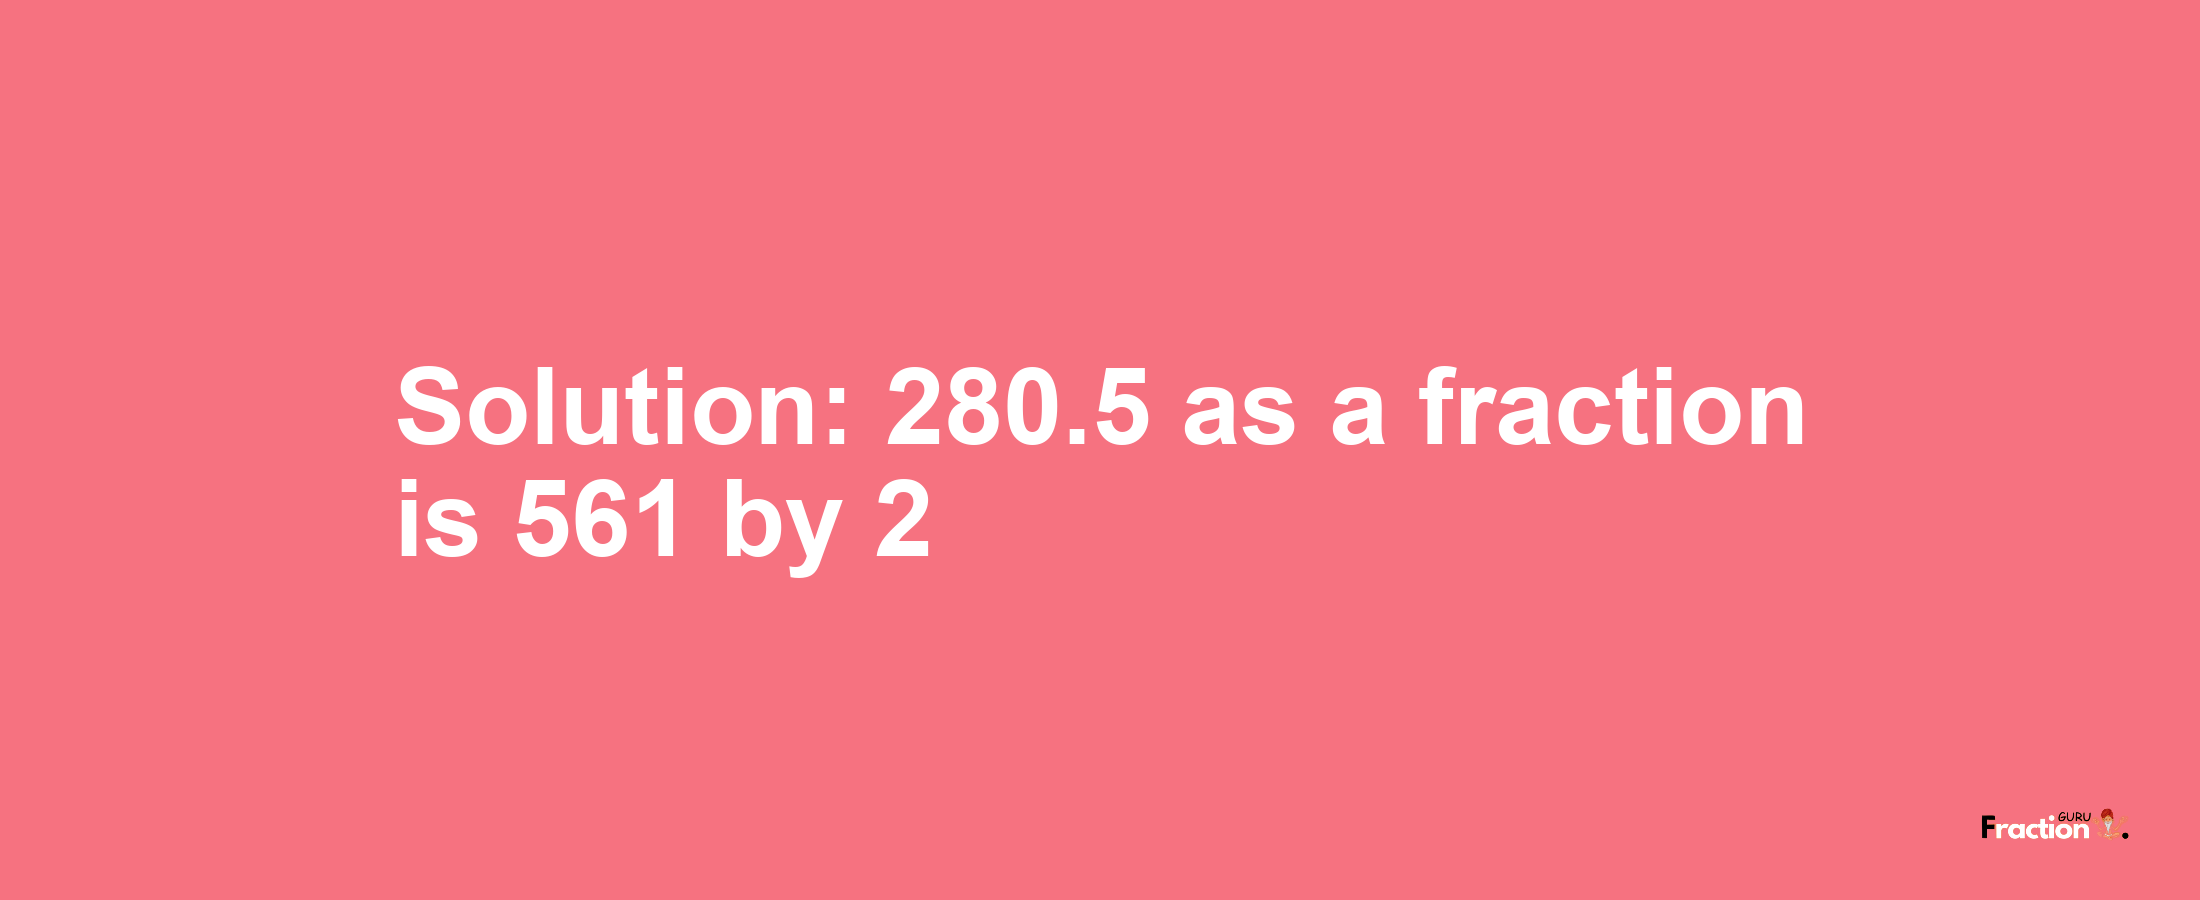 Solution:280.5 as a fraction is 561/2